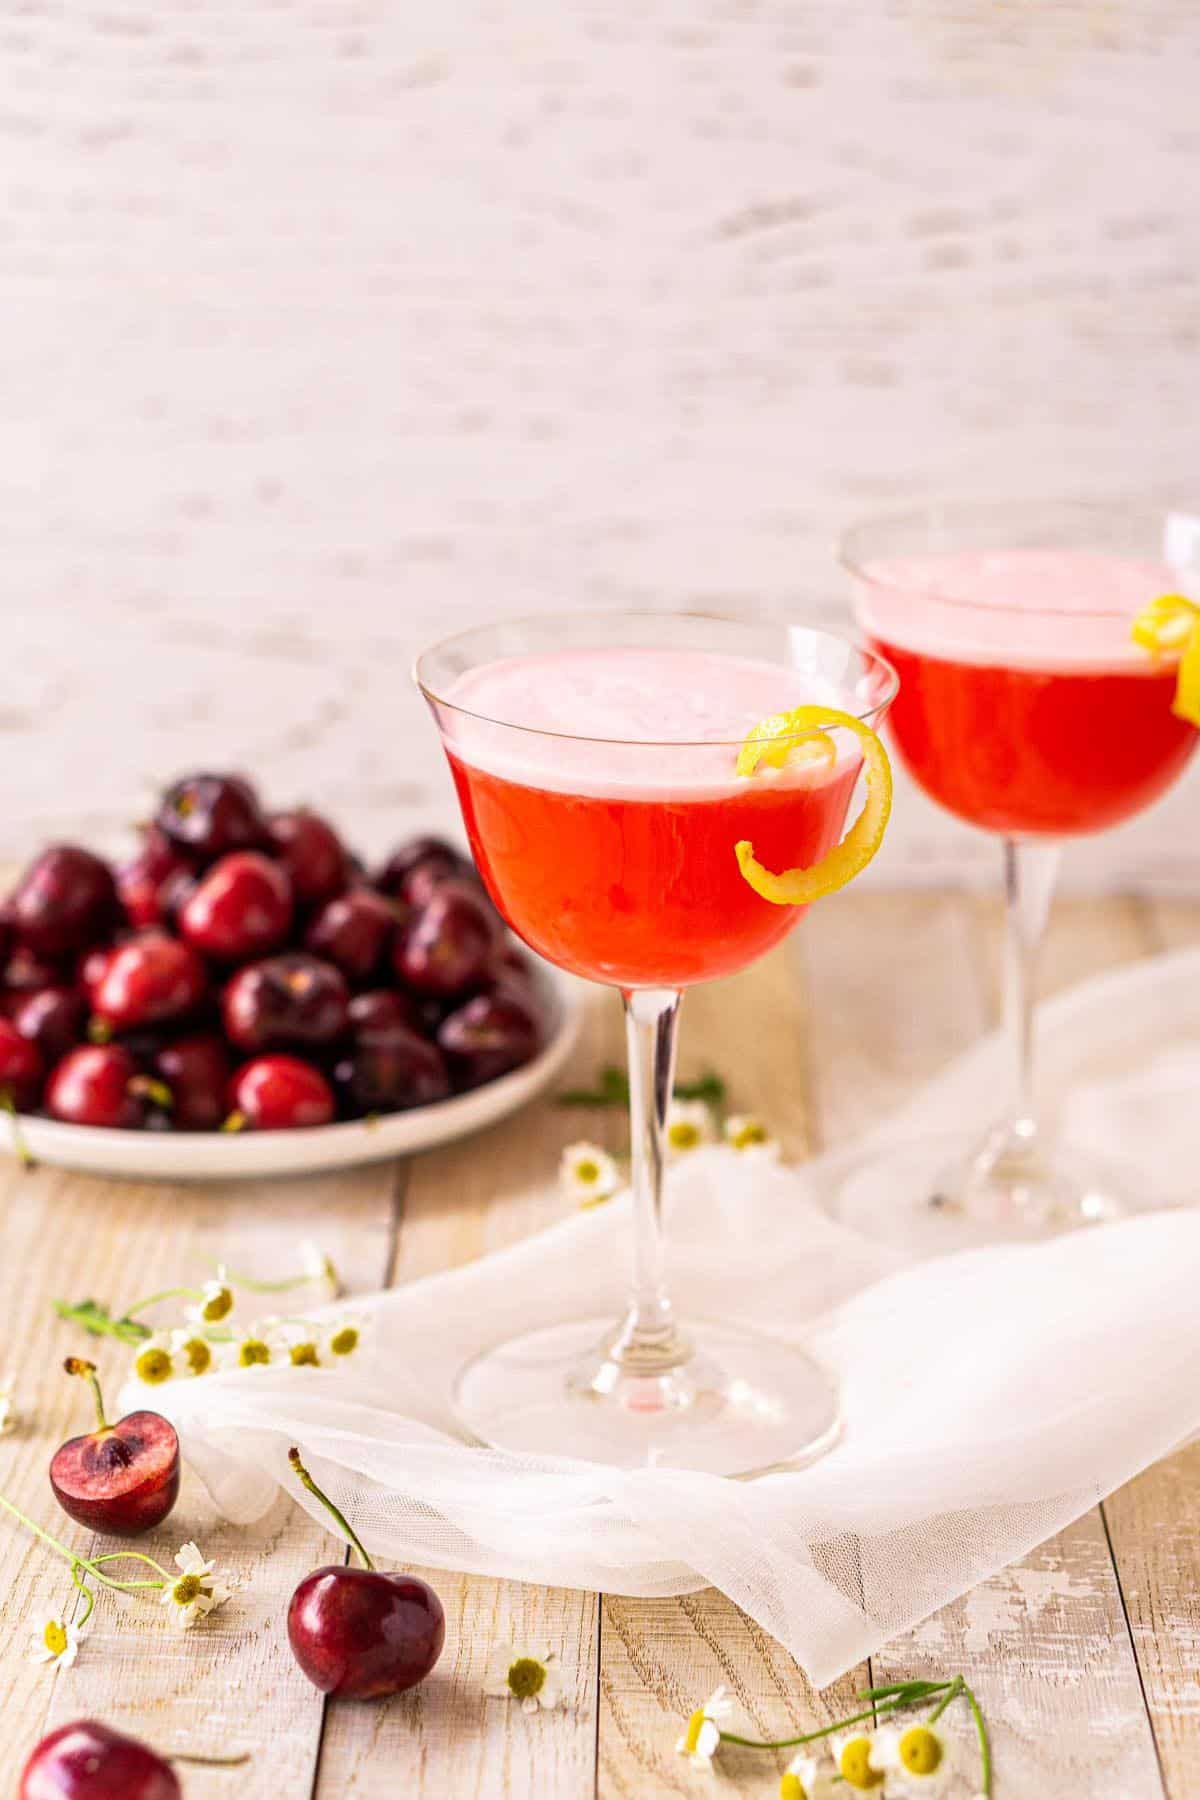 Two cherry vodka sours on a cream-colored wooden surface with cherries and white flowers around them.